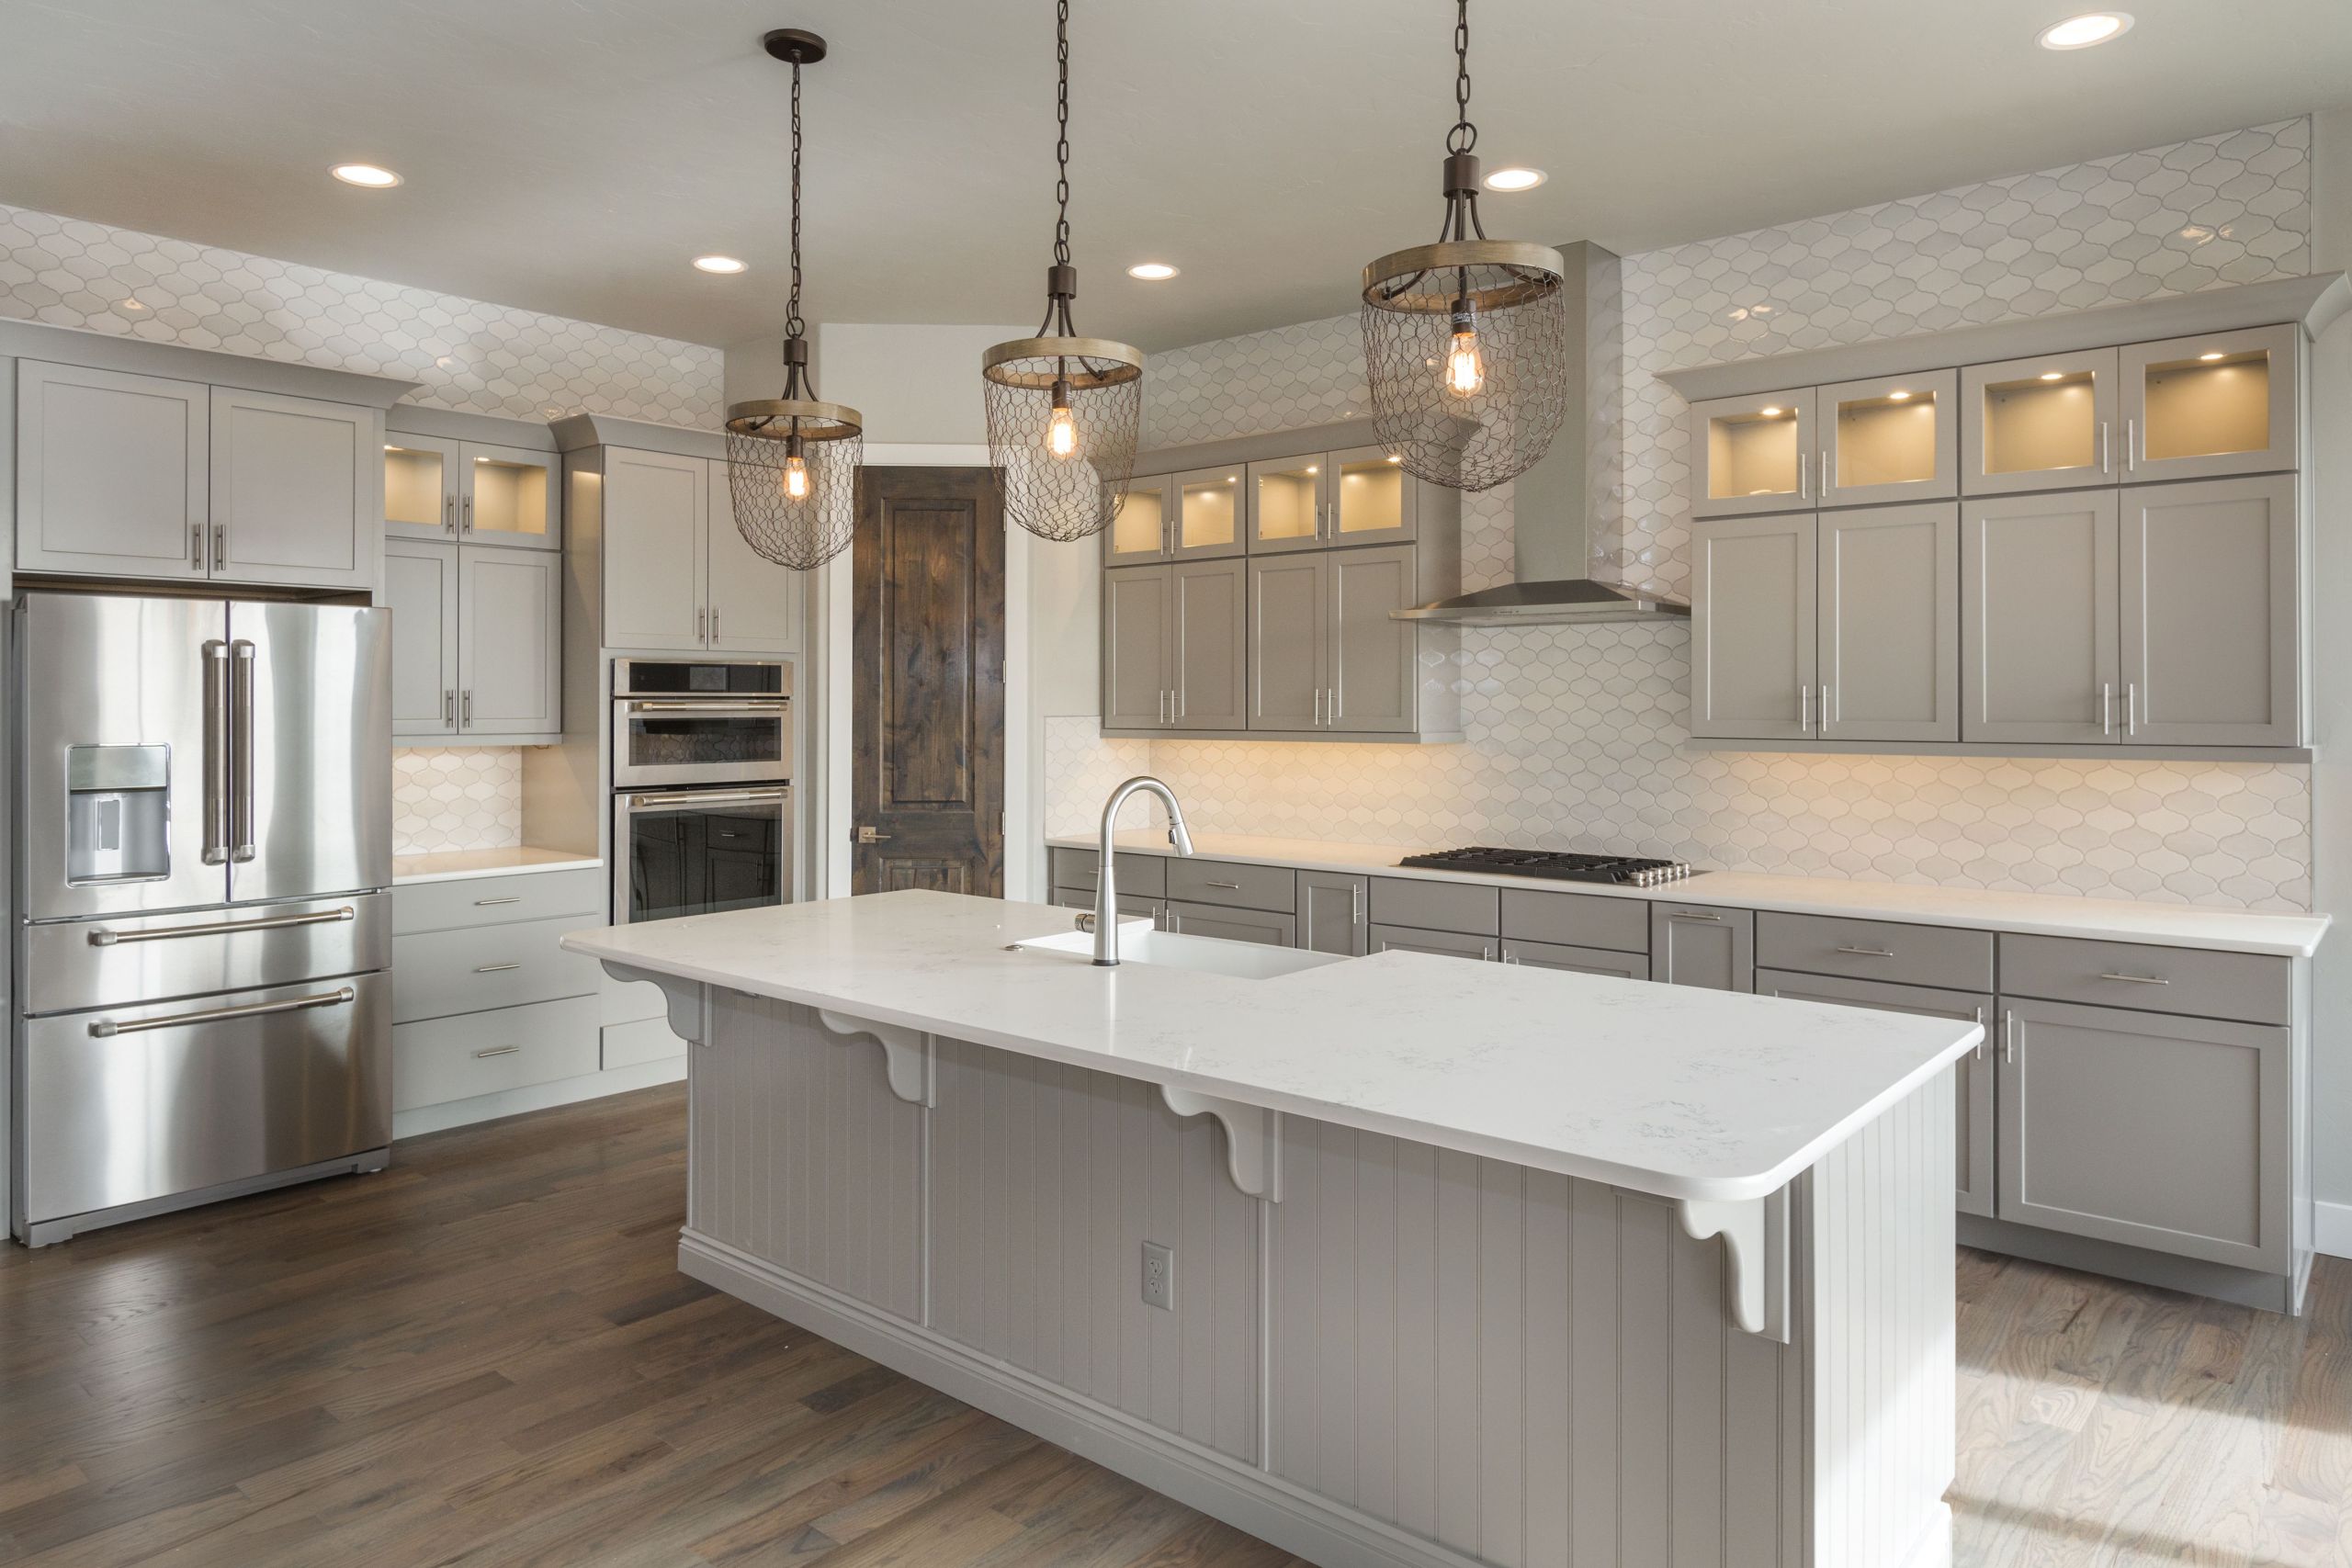 Kitchen Remodeling Tips
 The Top Kitchen Remodeling Tips for a Stellar Kitchen